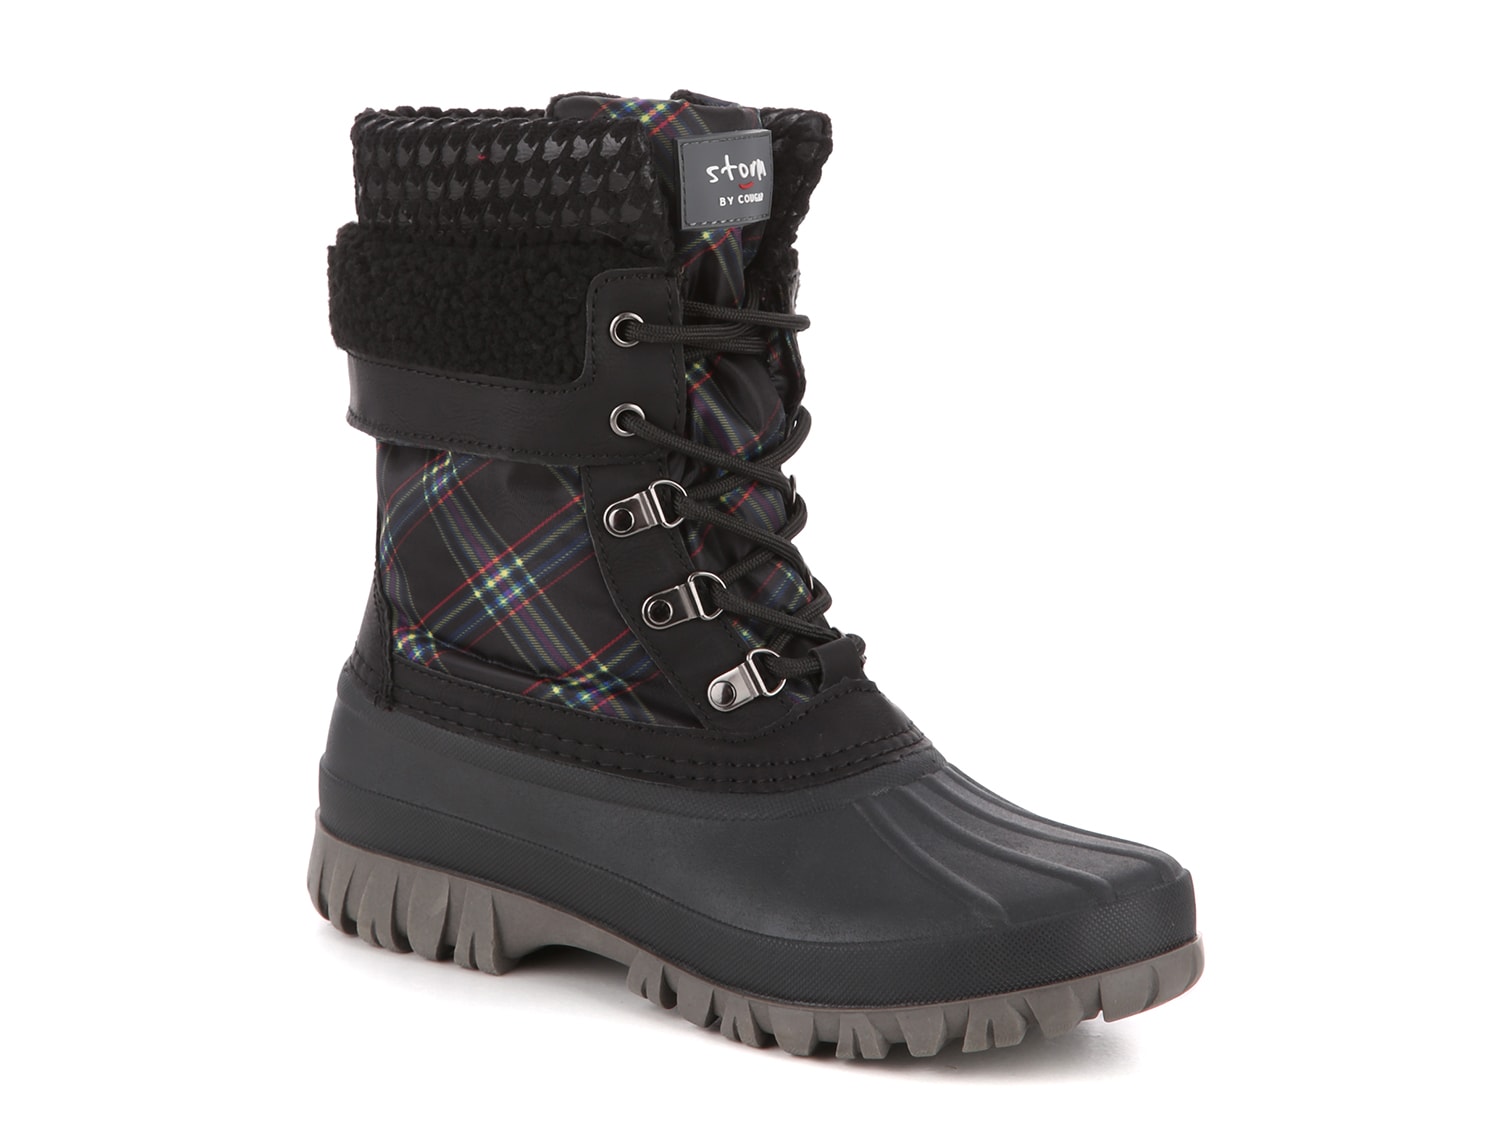 Storm by Cougar Creek Snow Boot Women's 